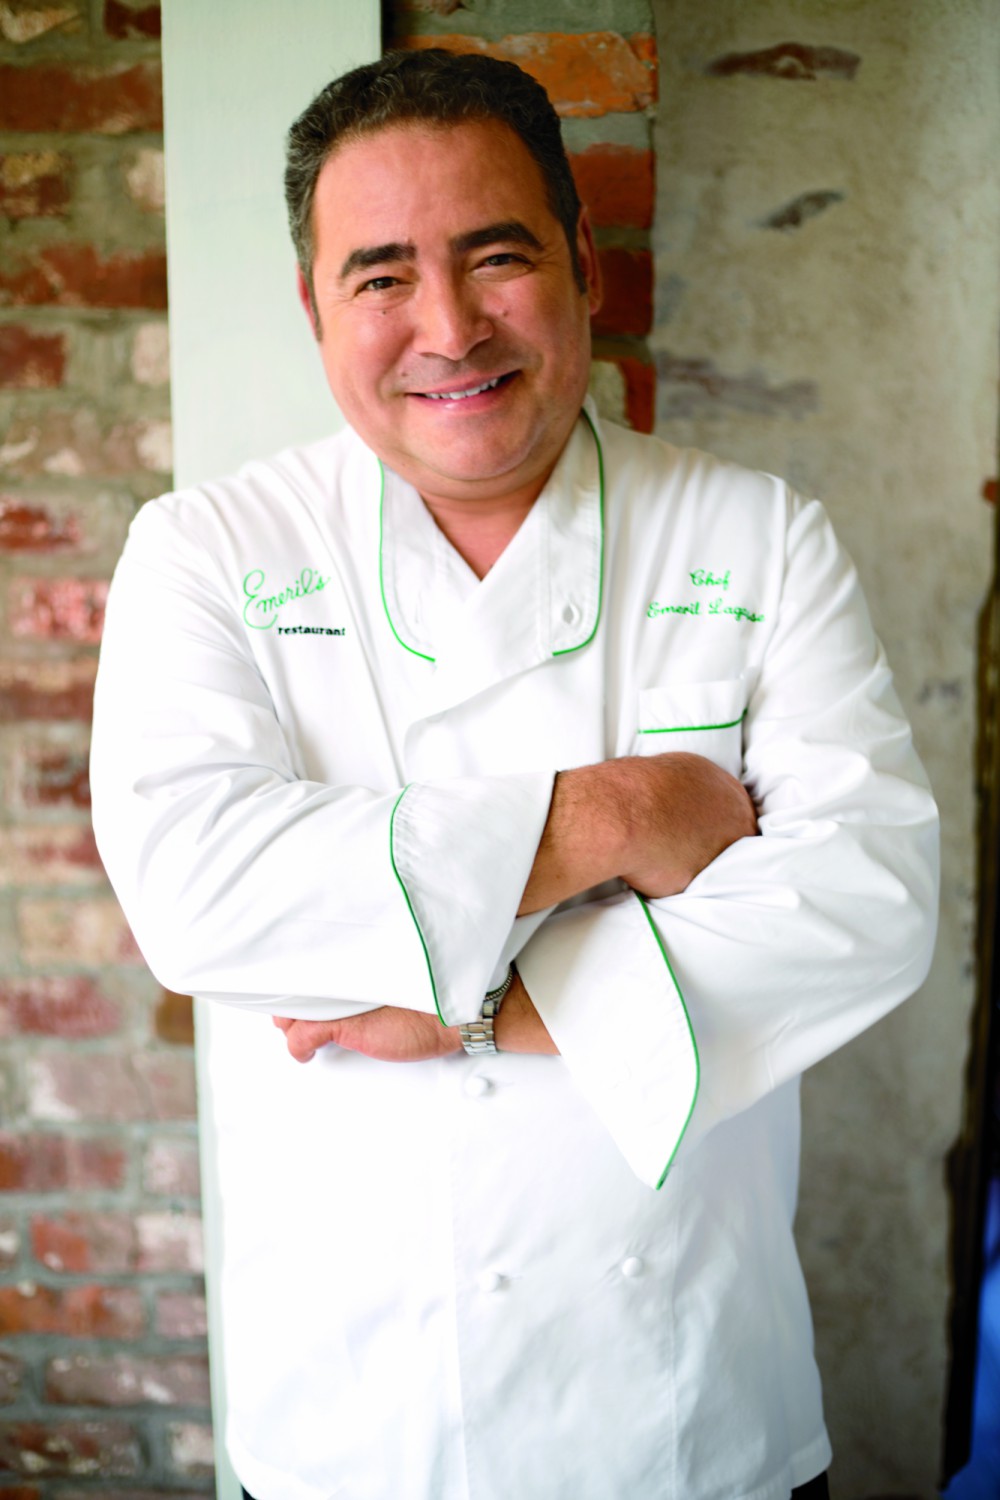 Emeril Lagasse Sets Sail With First-Ever Restaurant At Sea